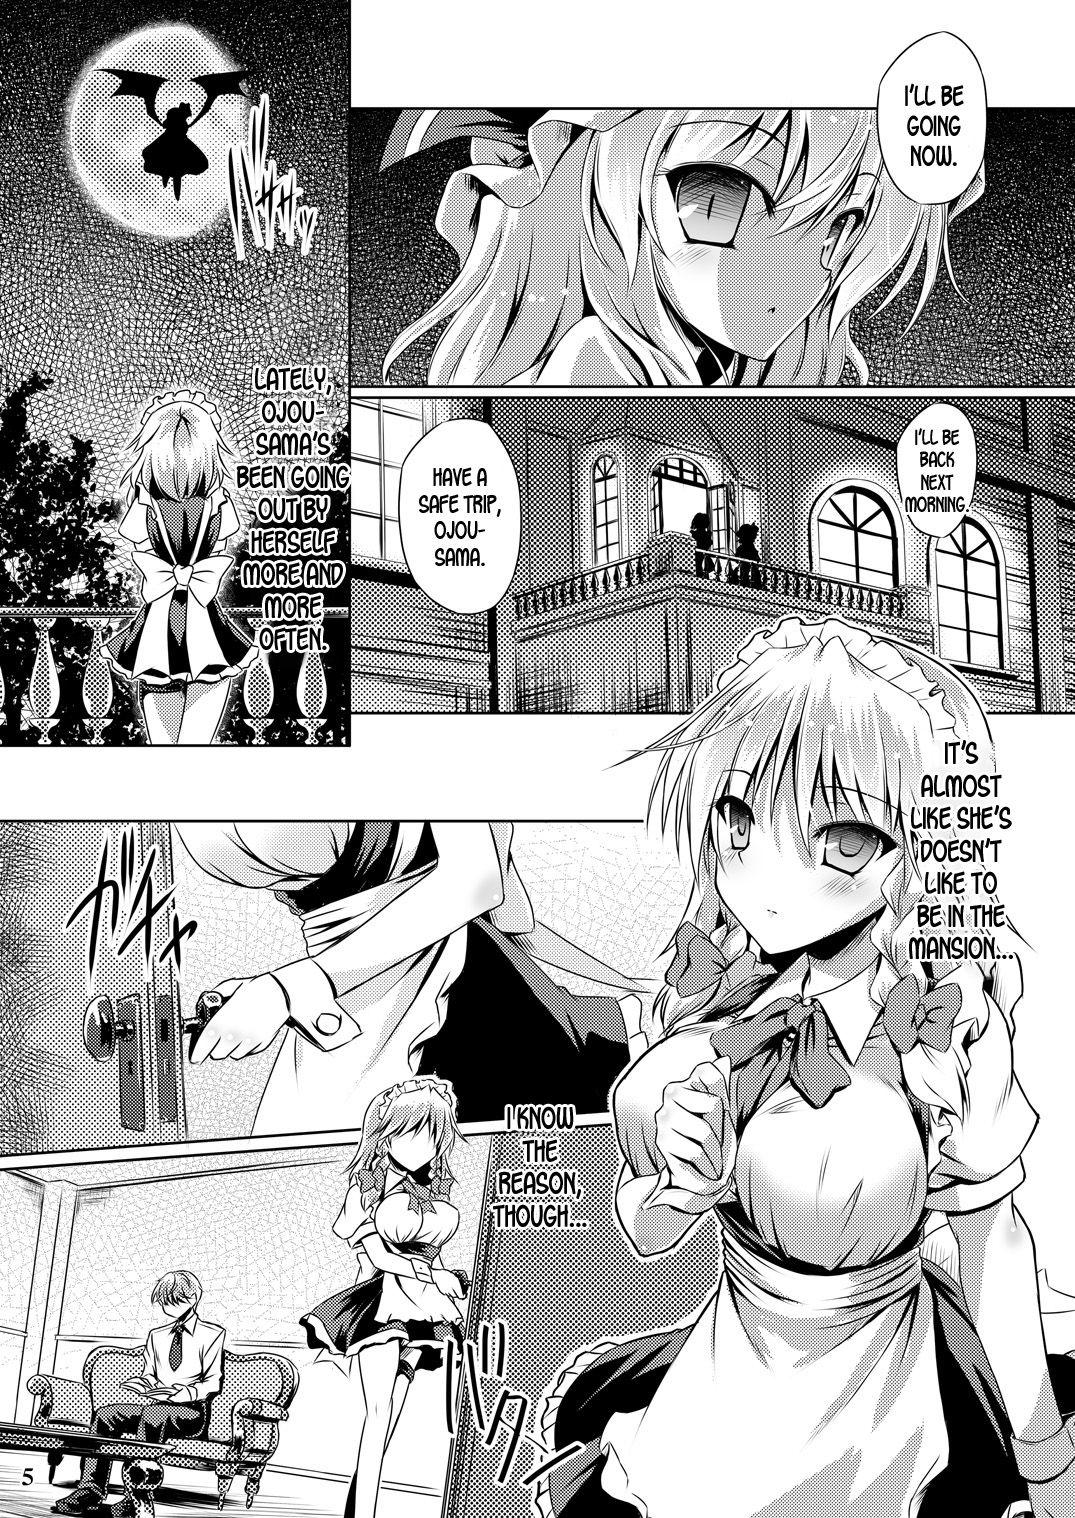 Spreading Juusha no Tame no Serenade - Touhou project Leche - Page 4